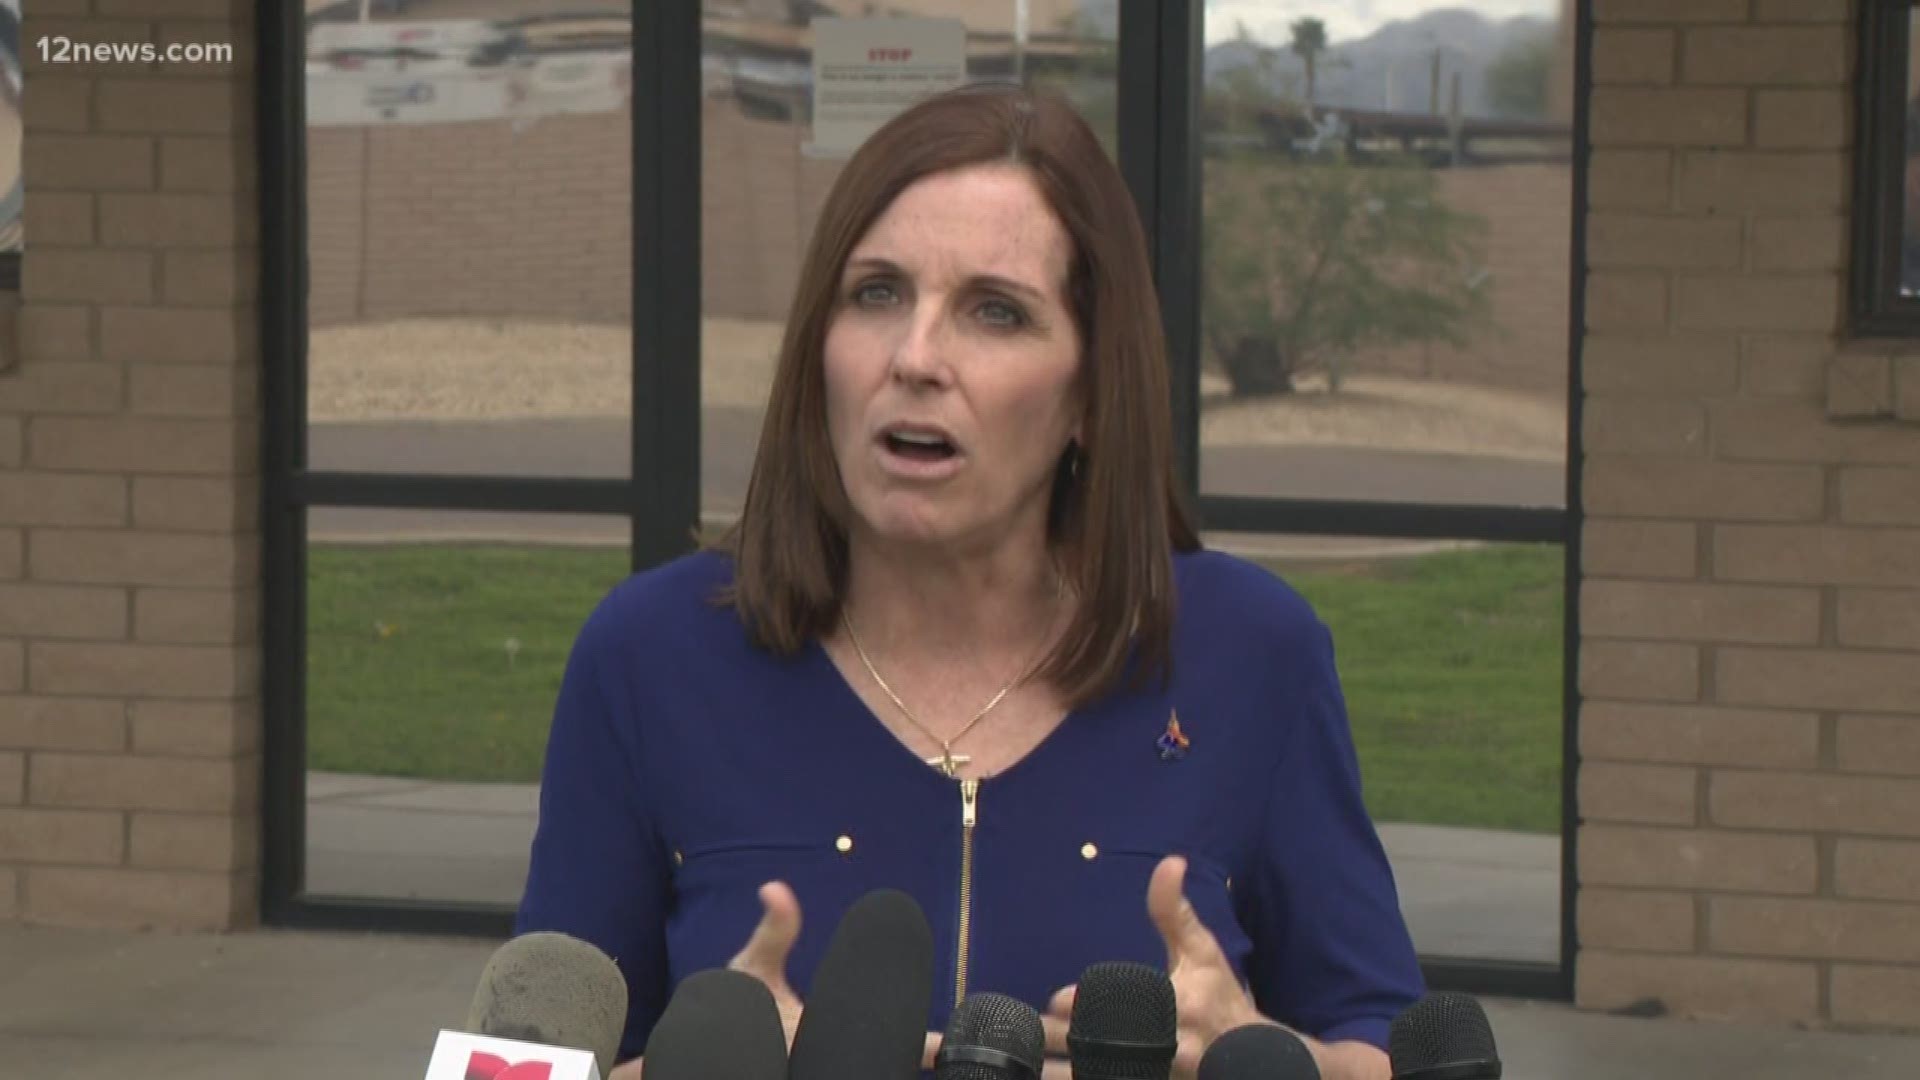 Senator Martha McSally was at Luke Air Force Base Thursday as part of an initiative to put together a task force to reduce sexual assaults in the military. Senator McSally says she wants to create an environment which makes it easier to report assaults.